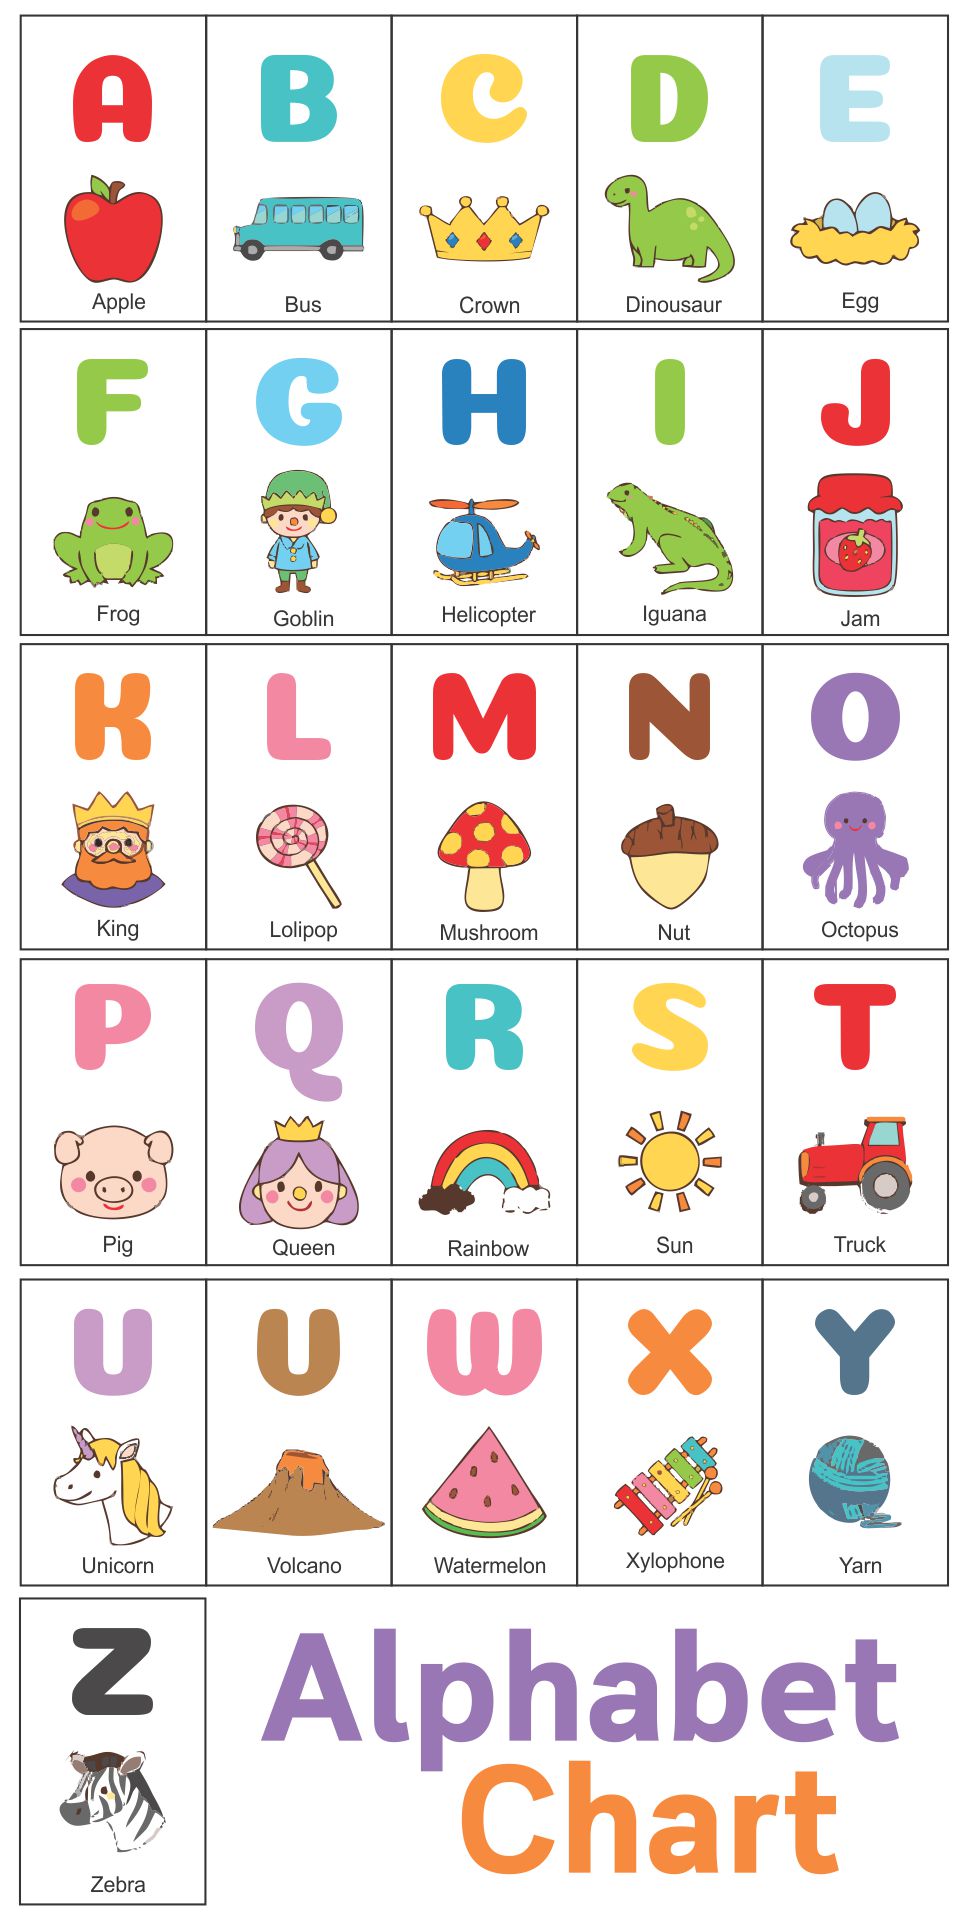 free-printable-alphabet-charts-alphabet-chart-free-bambini-che-porn-sex-picture